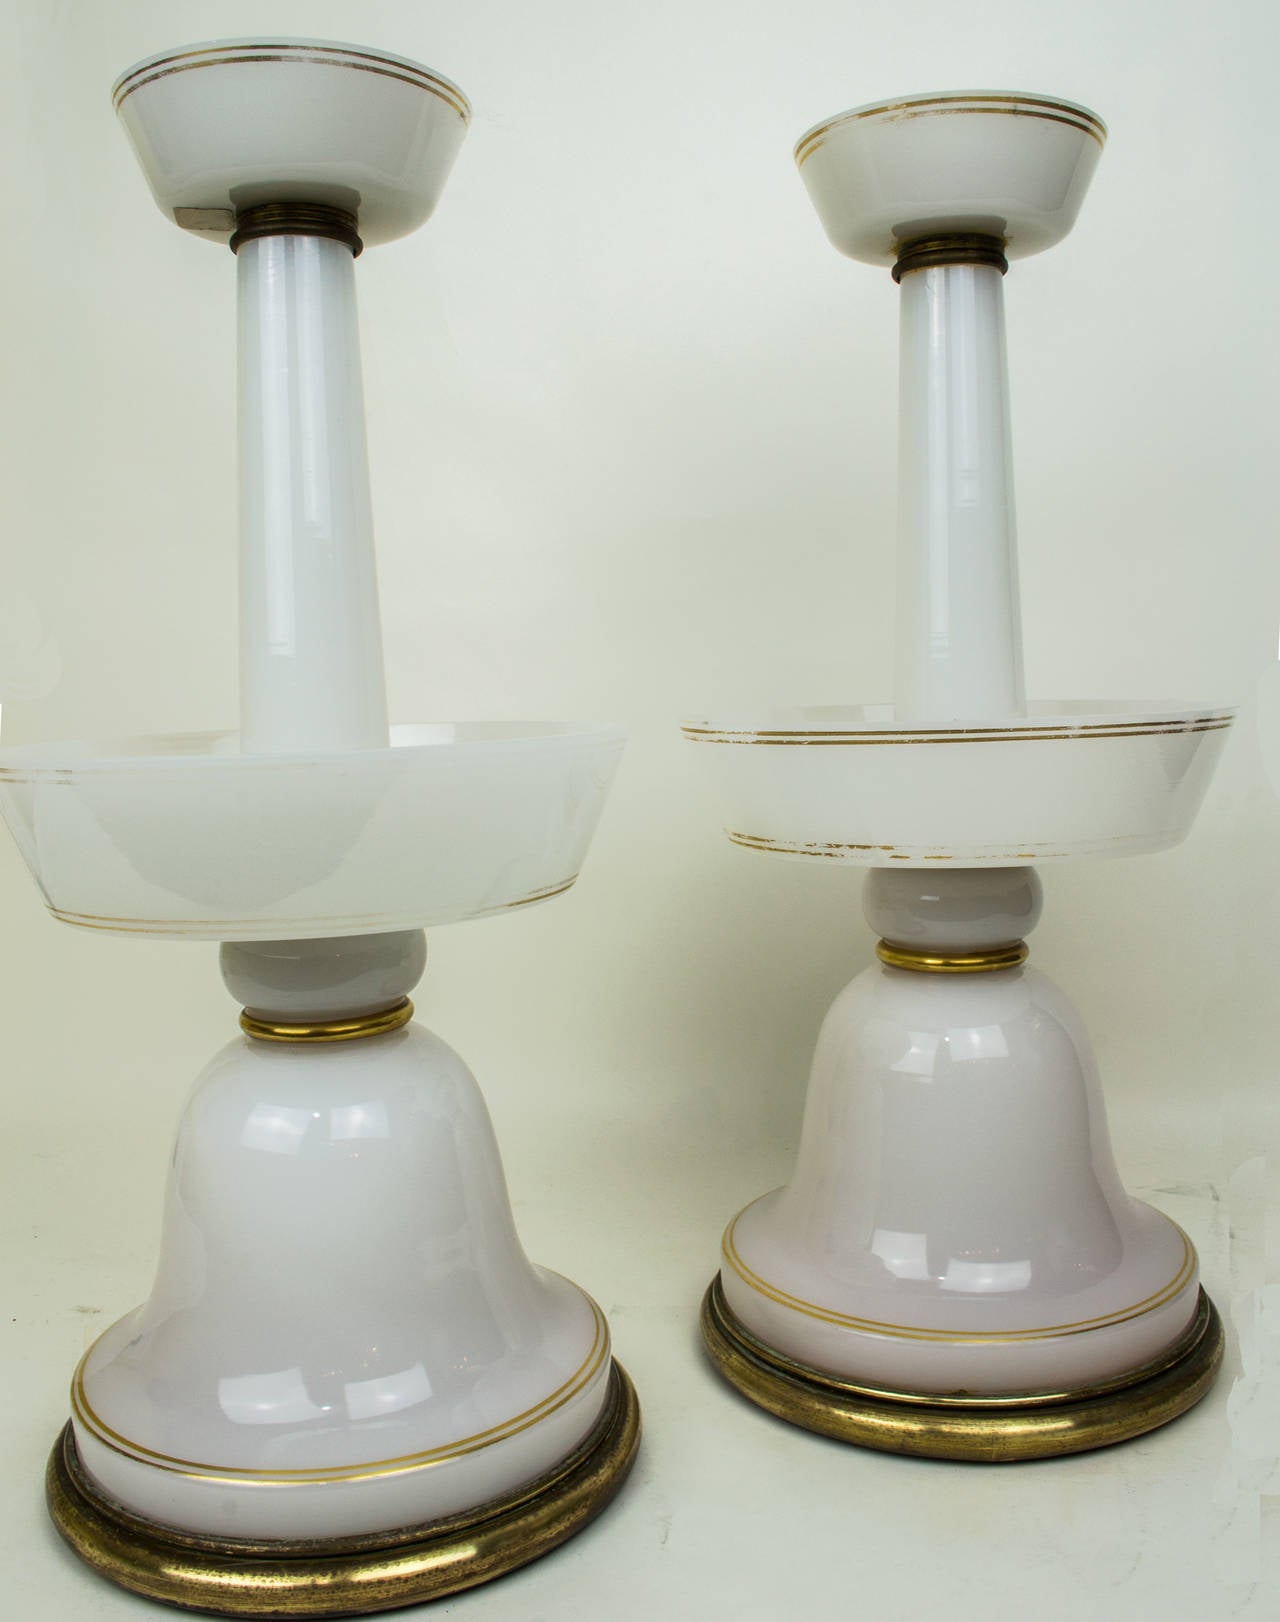 Magnificent and unusual pair of French oplaine and bronze tazza candleholders with gold decorations.
Stock number: G11.